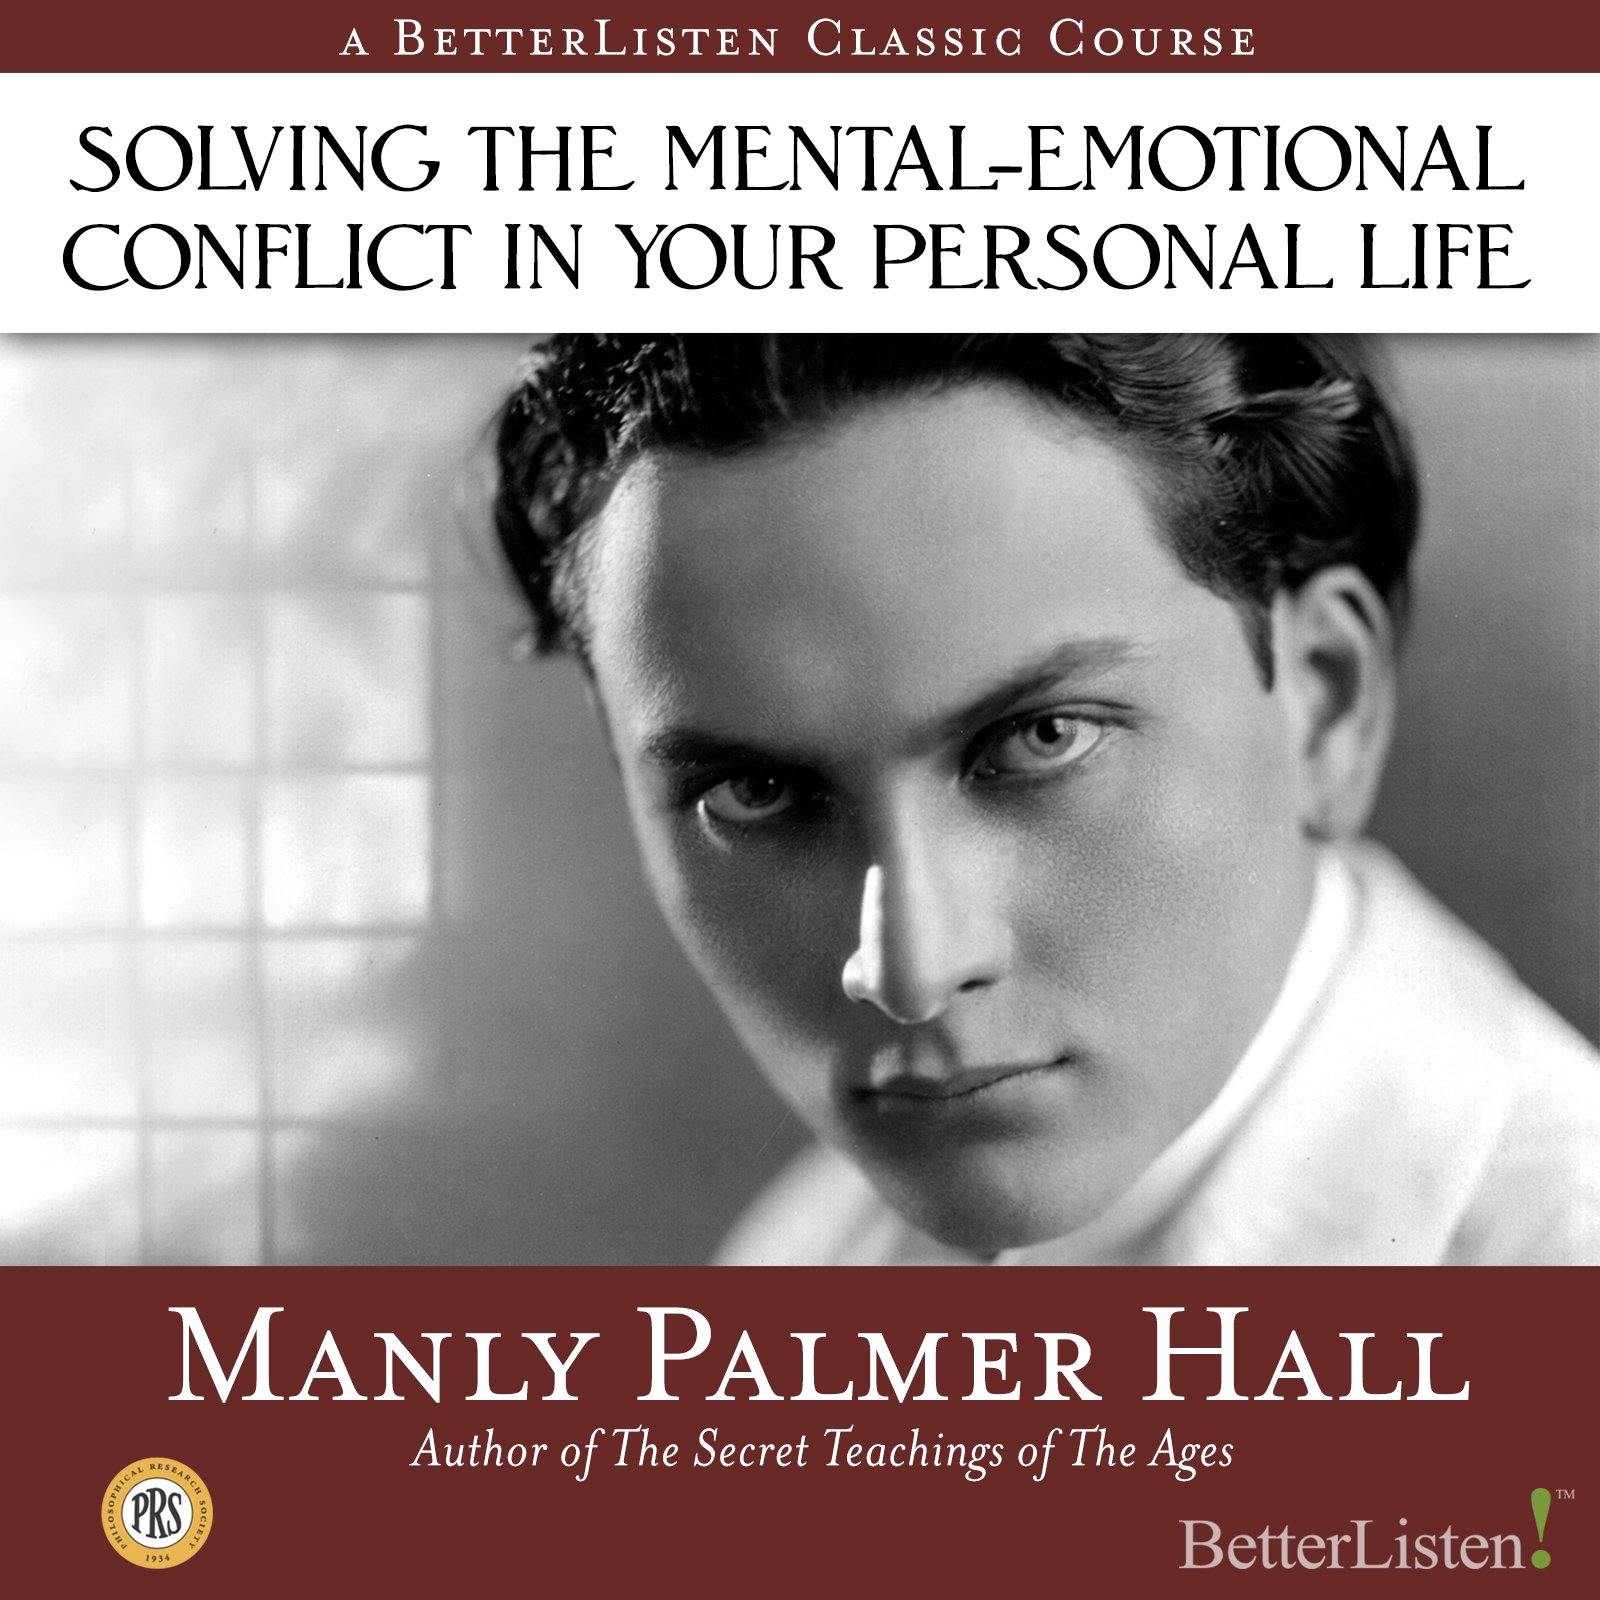 Solving the Mental-Emotional Conflict in Your Personal Life with Manly P. Hall Audio Program Philosophical Research Society - BetterListen!